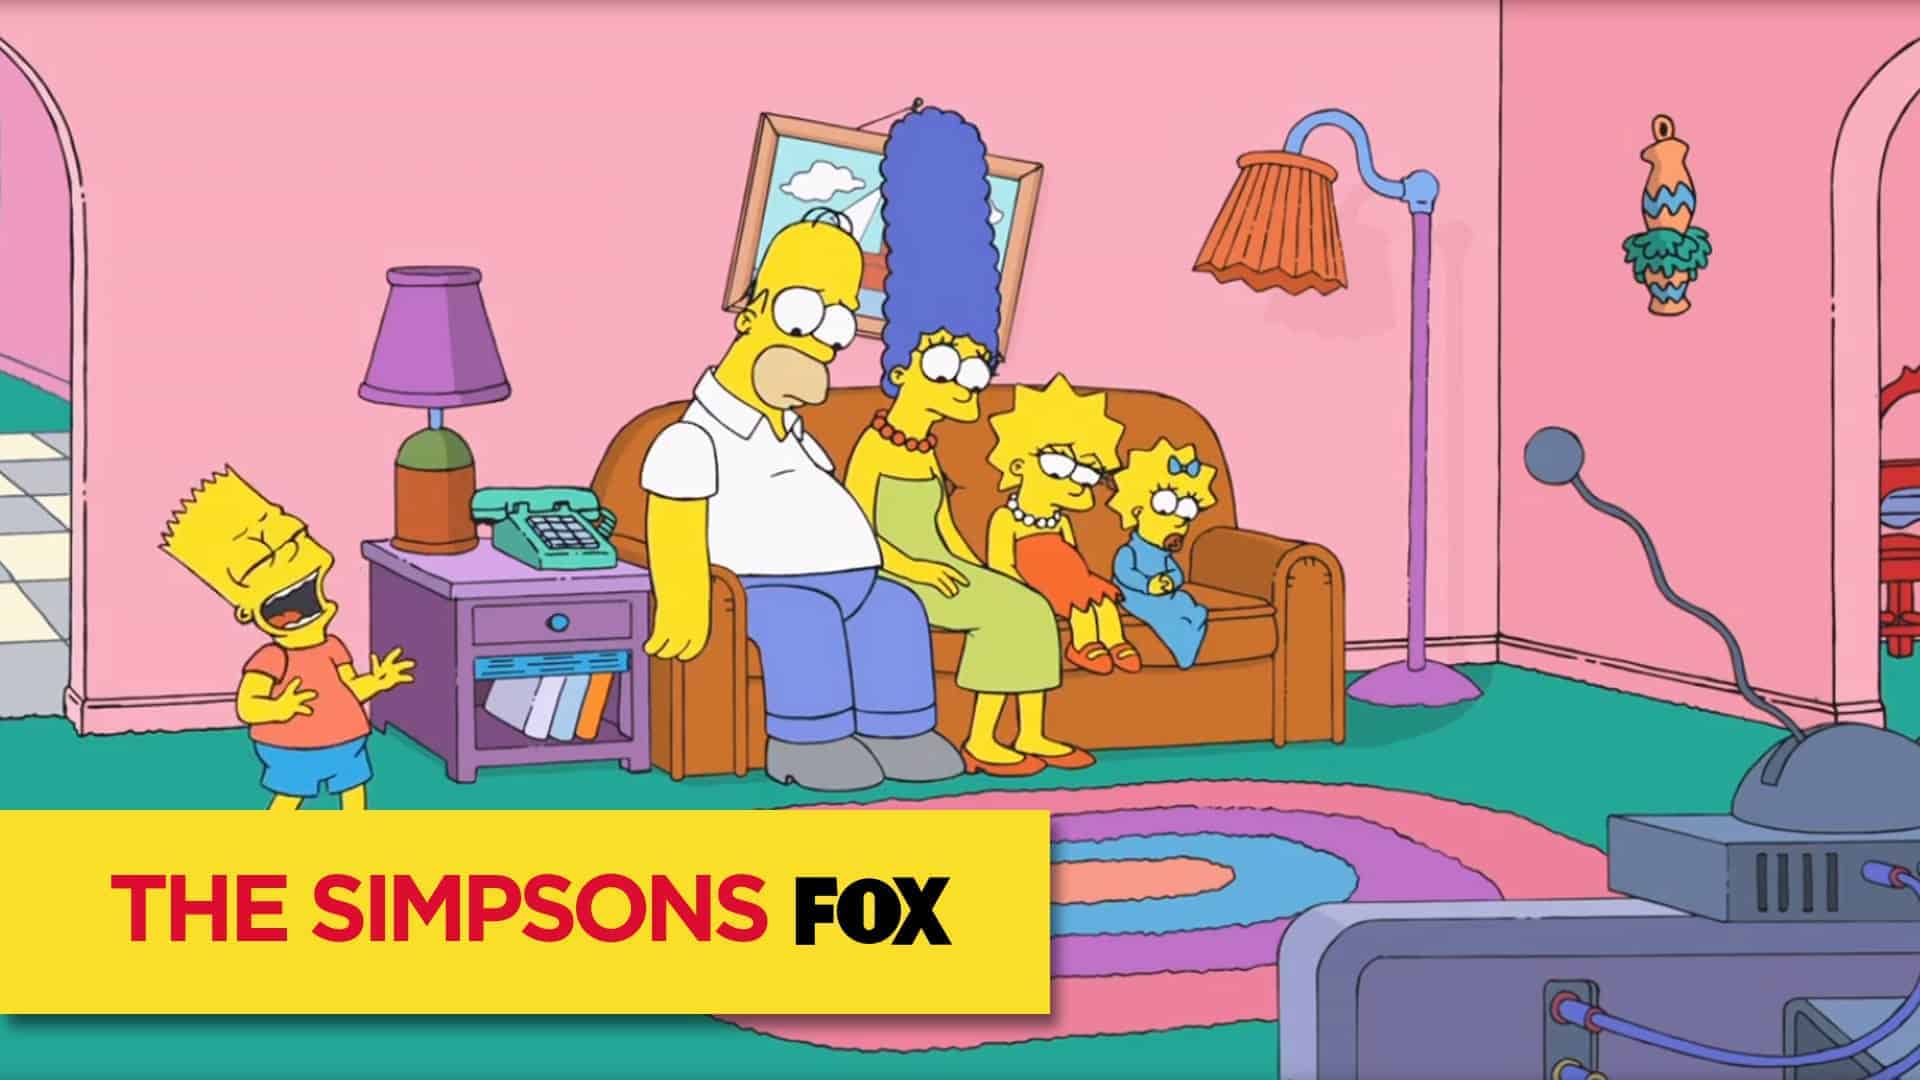 Simpsons Disney-Style Couch Gag